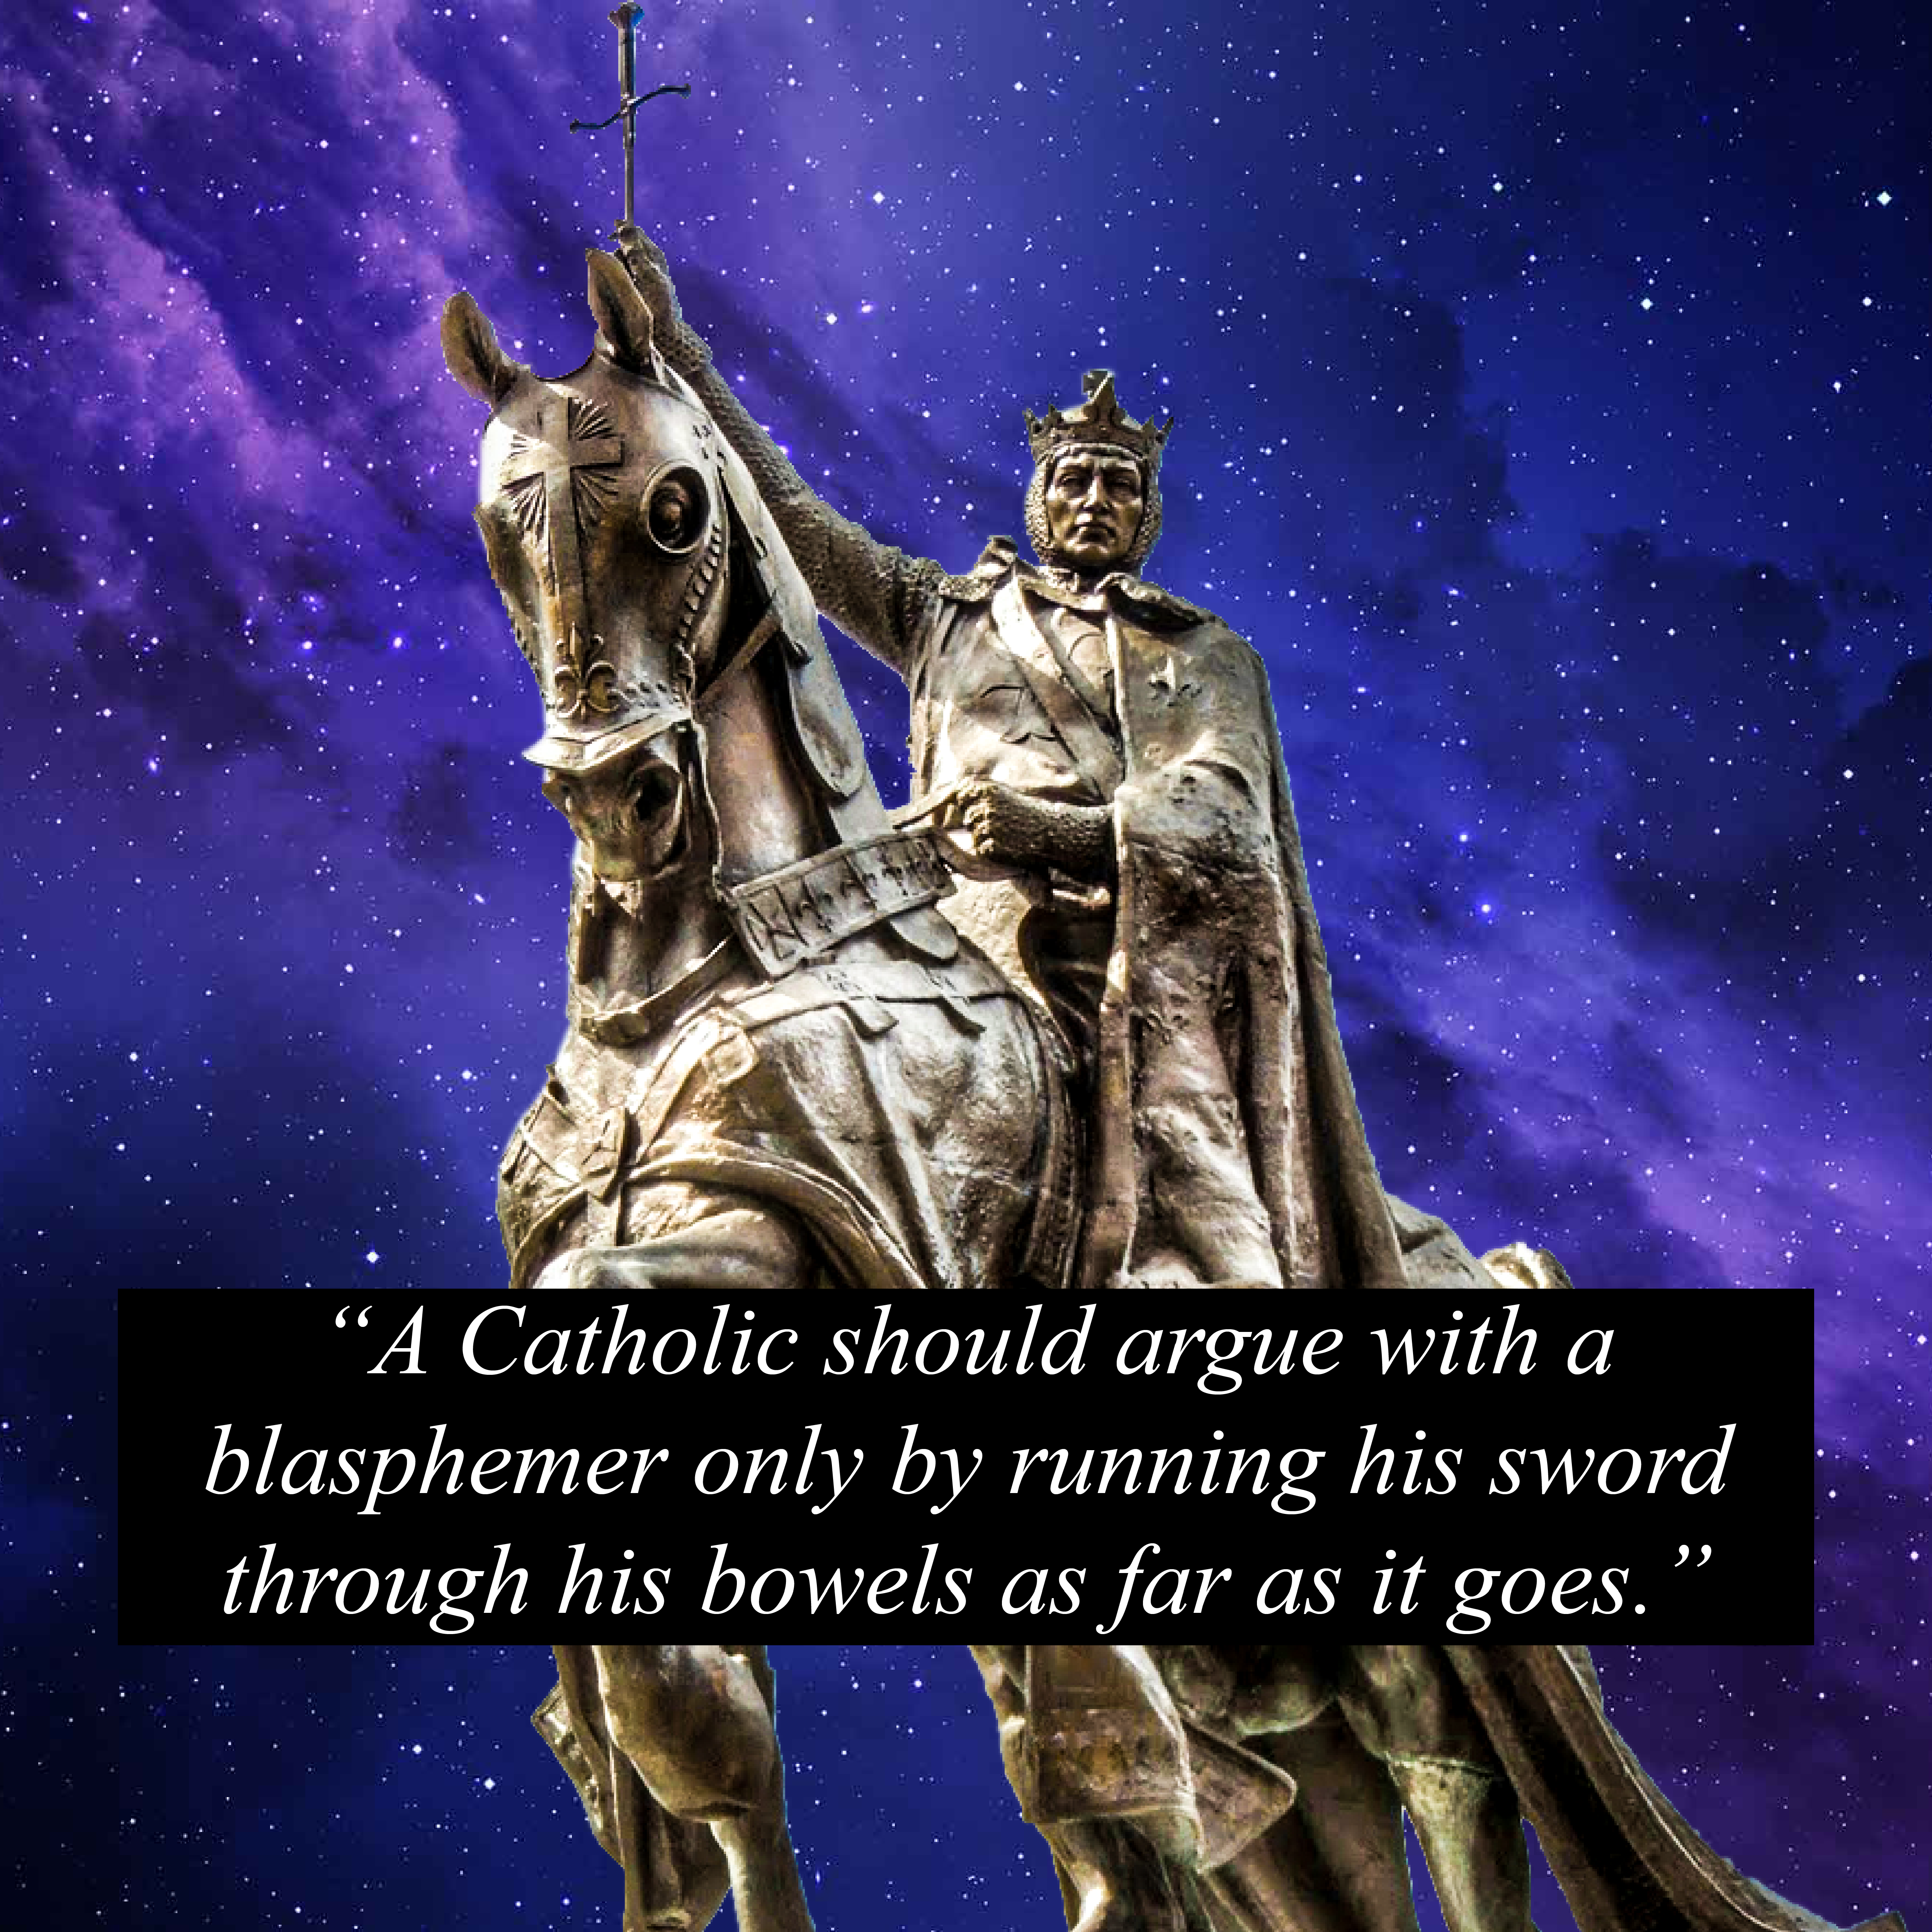 St King Louis IX (Quote w/out filter) by TradRaider on DeviantArt